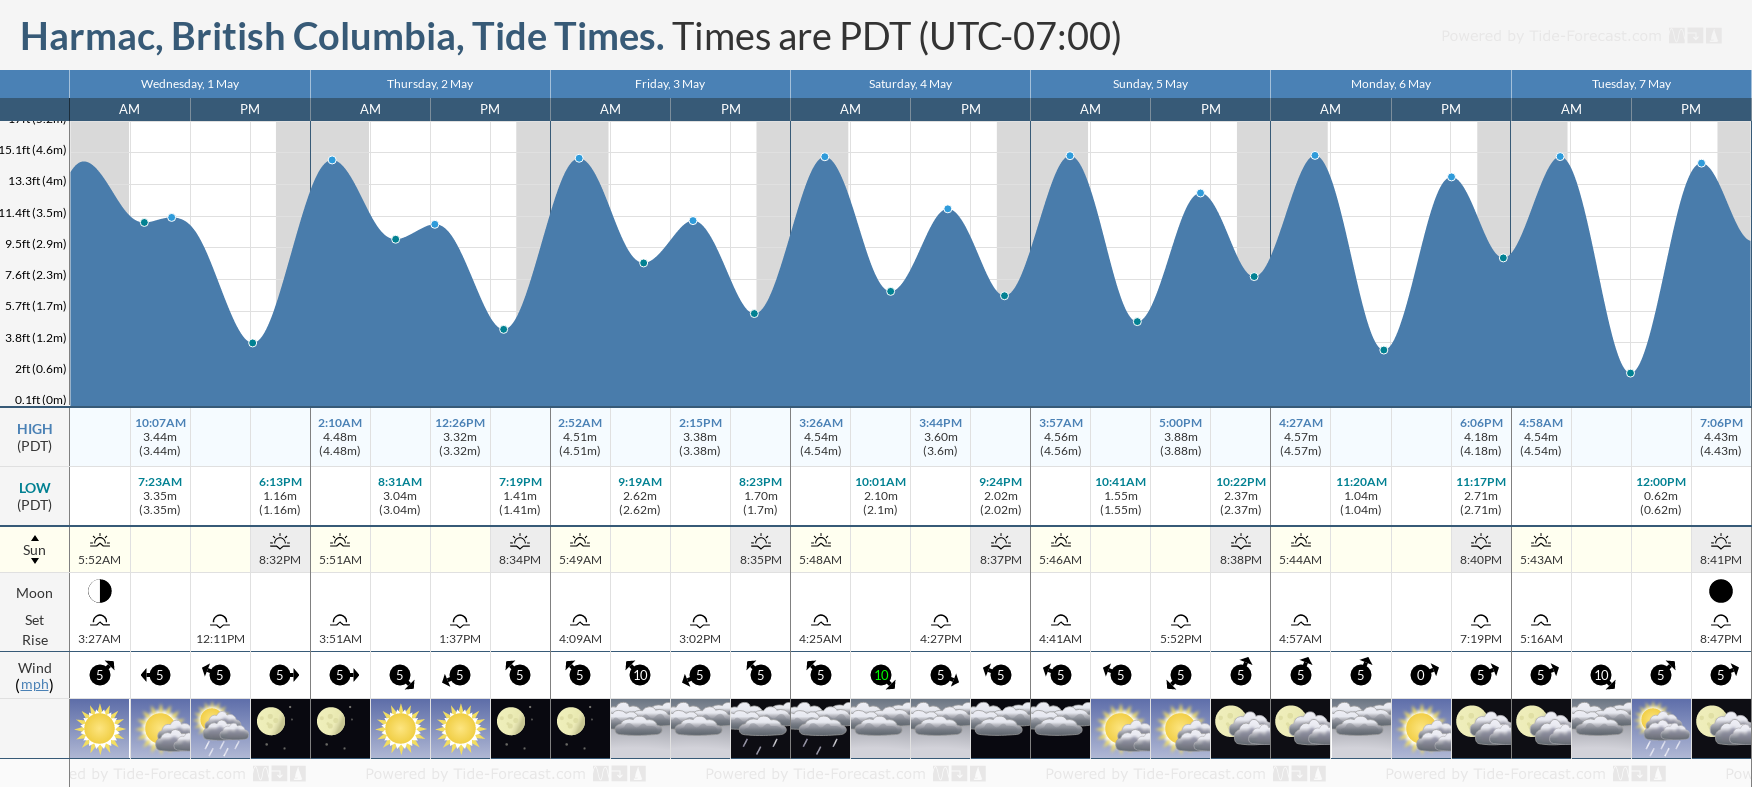 Harmac, British Columbia Tide Chart including high and low tide tide times for the next 7 days